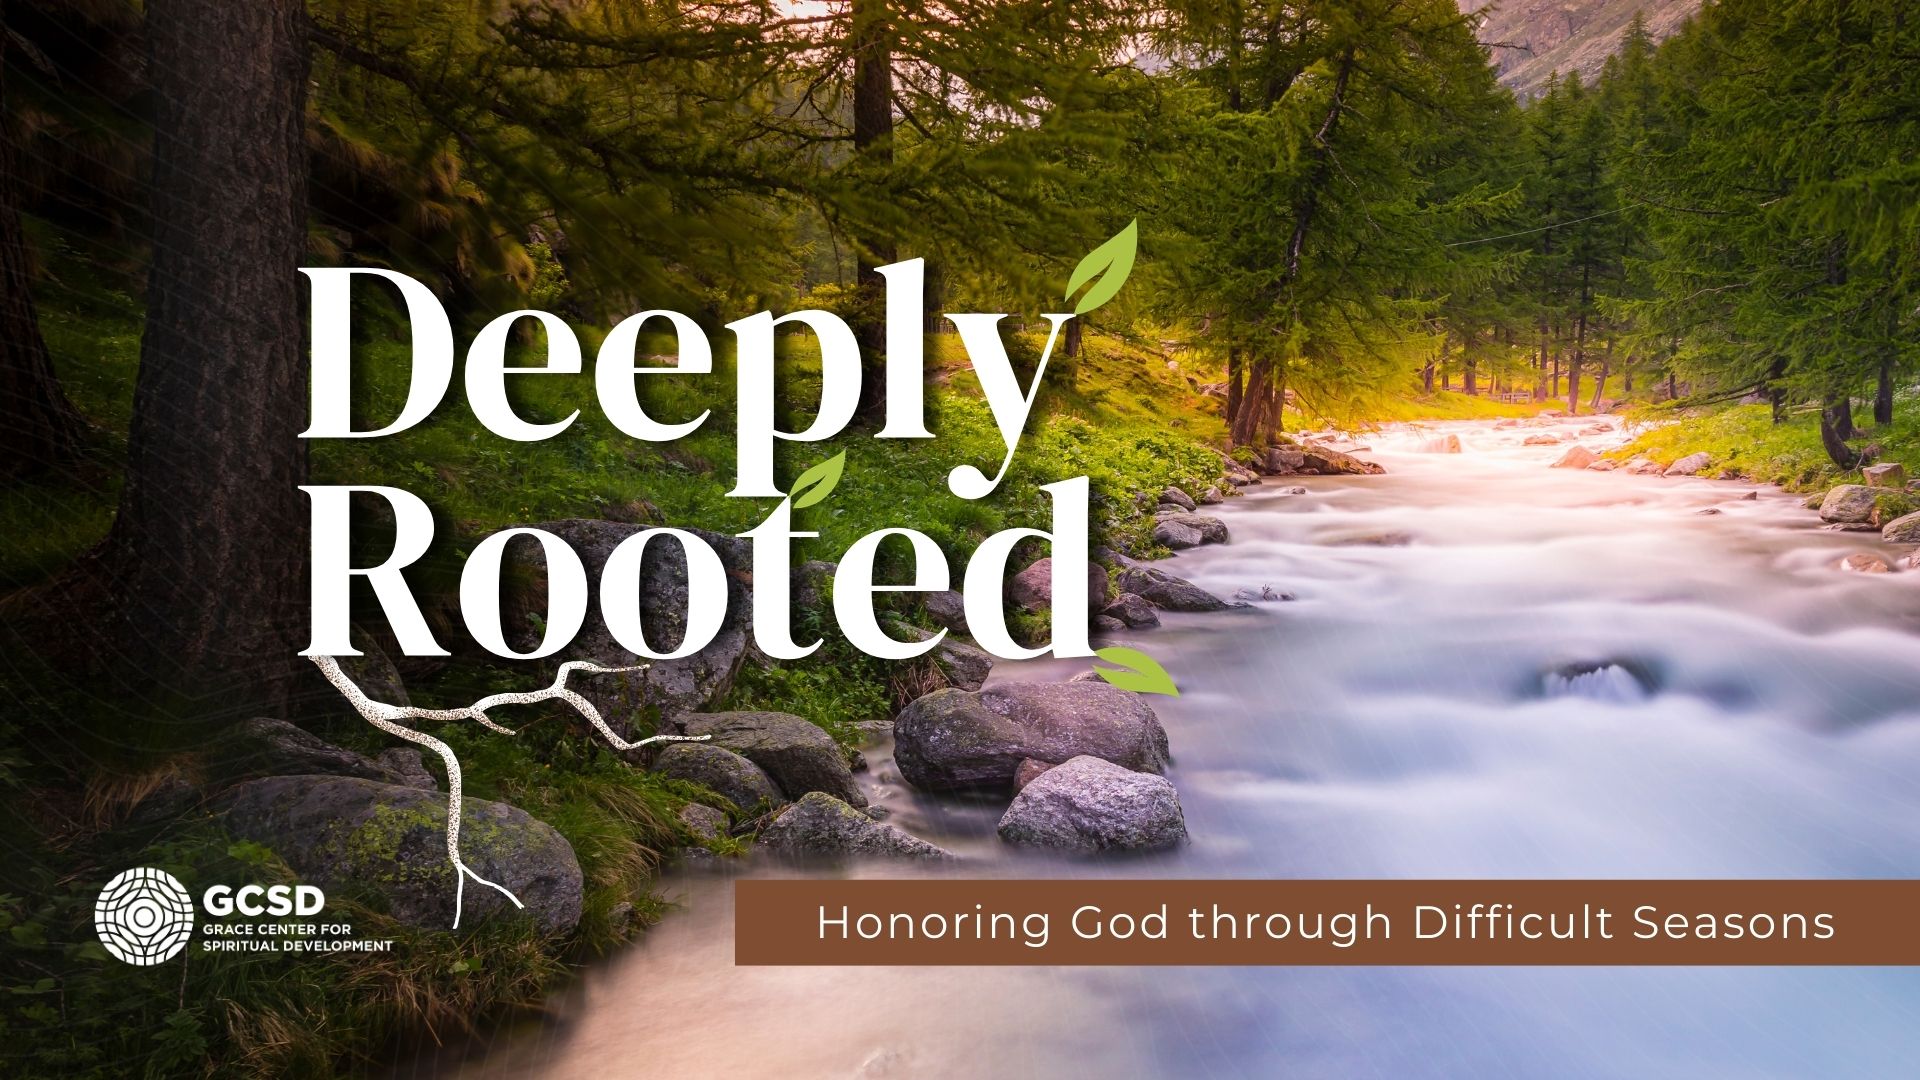 Deeply Rooted: Honoring God through Difficult Seasons